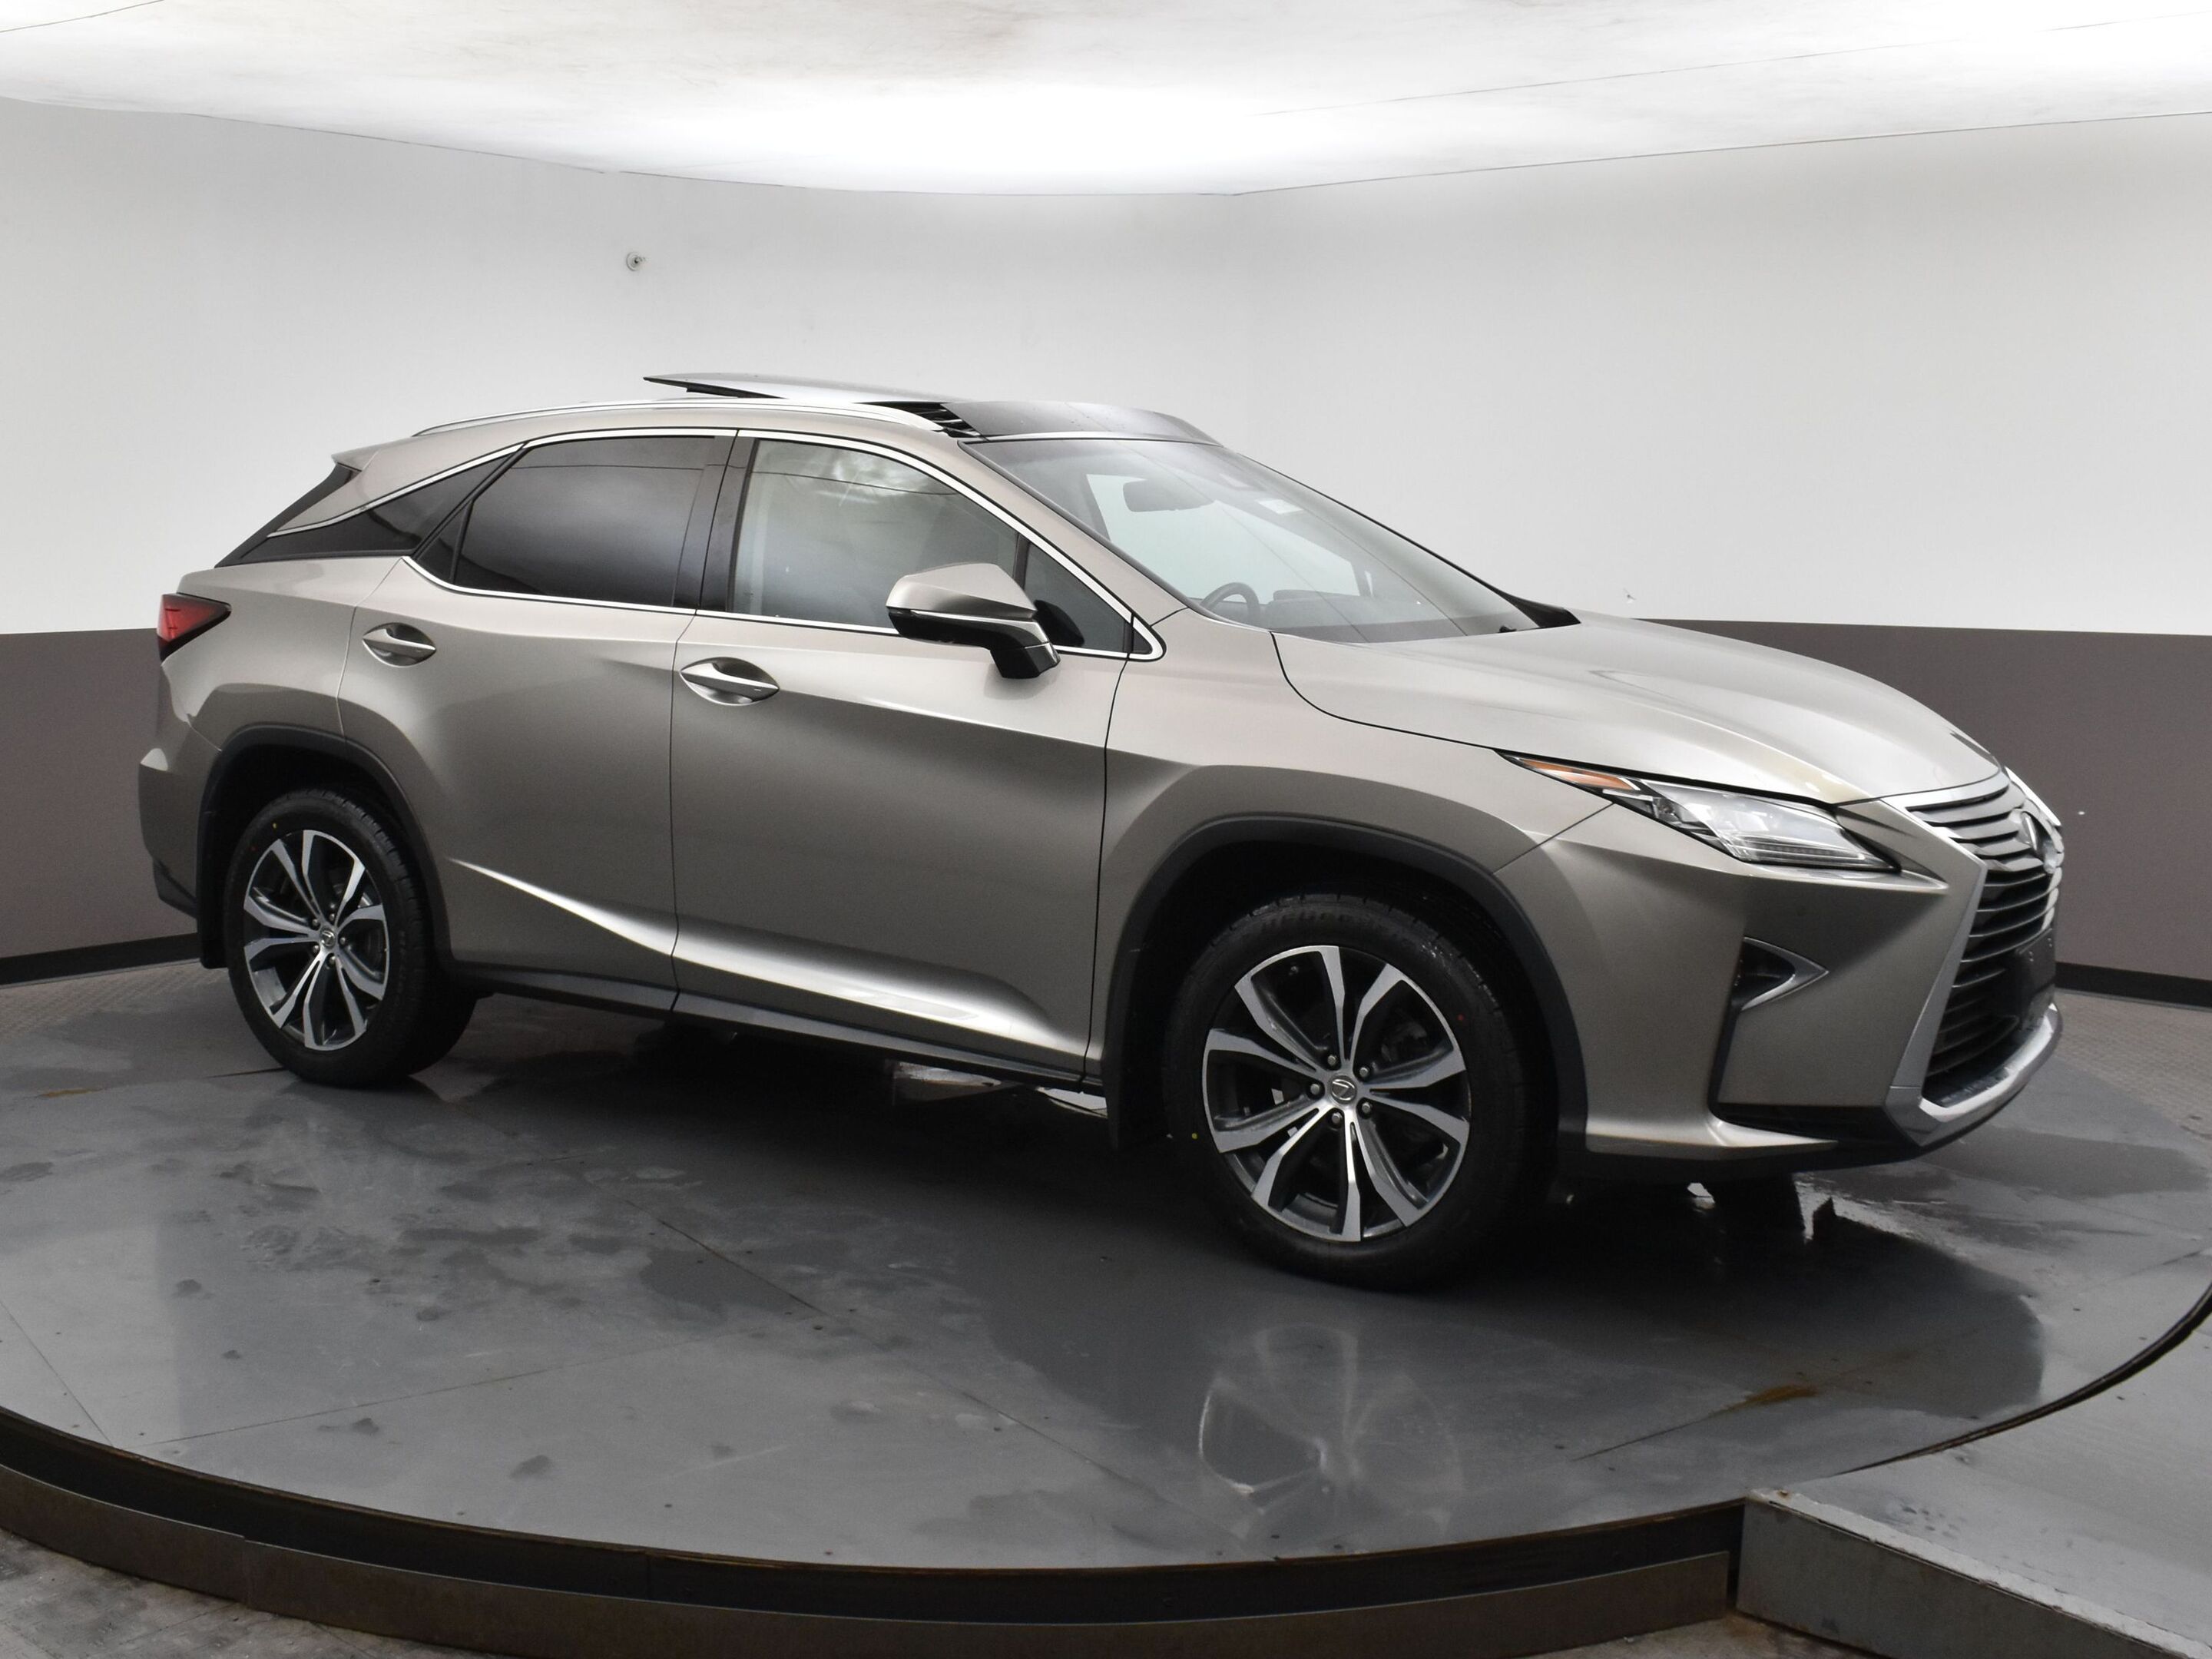 2017 Lexus RX 350 EXECUTIVE AWD BOOK YOUR TEST DRIVE TODAY! 902-466-